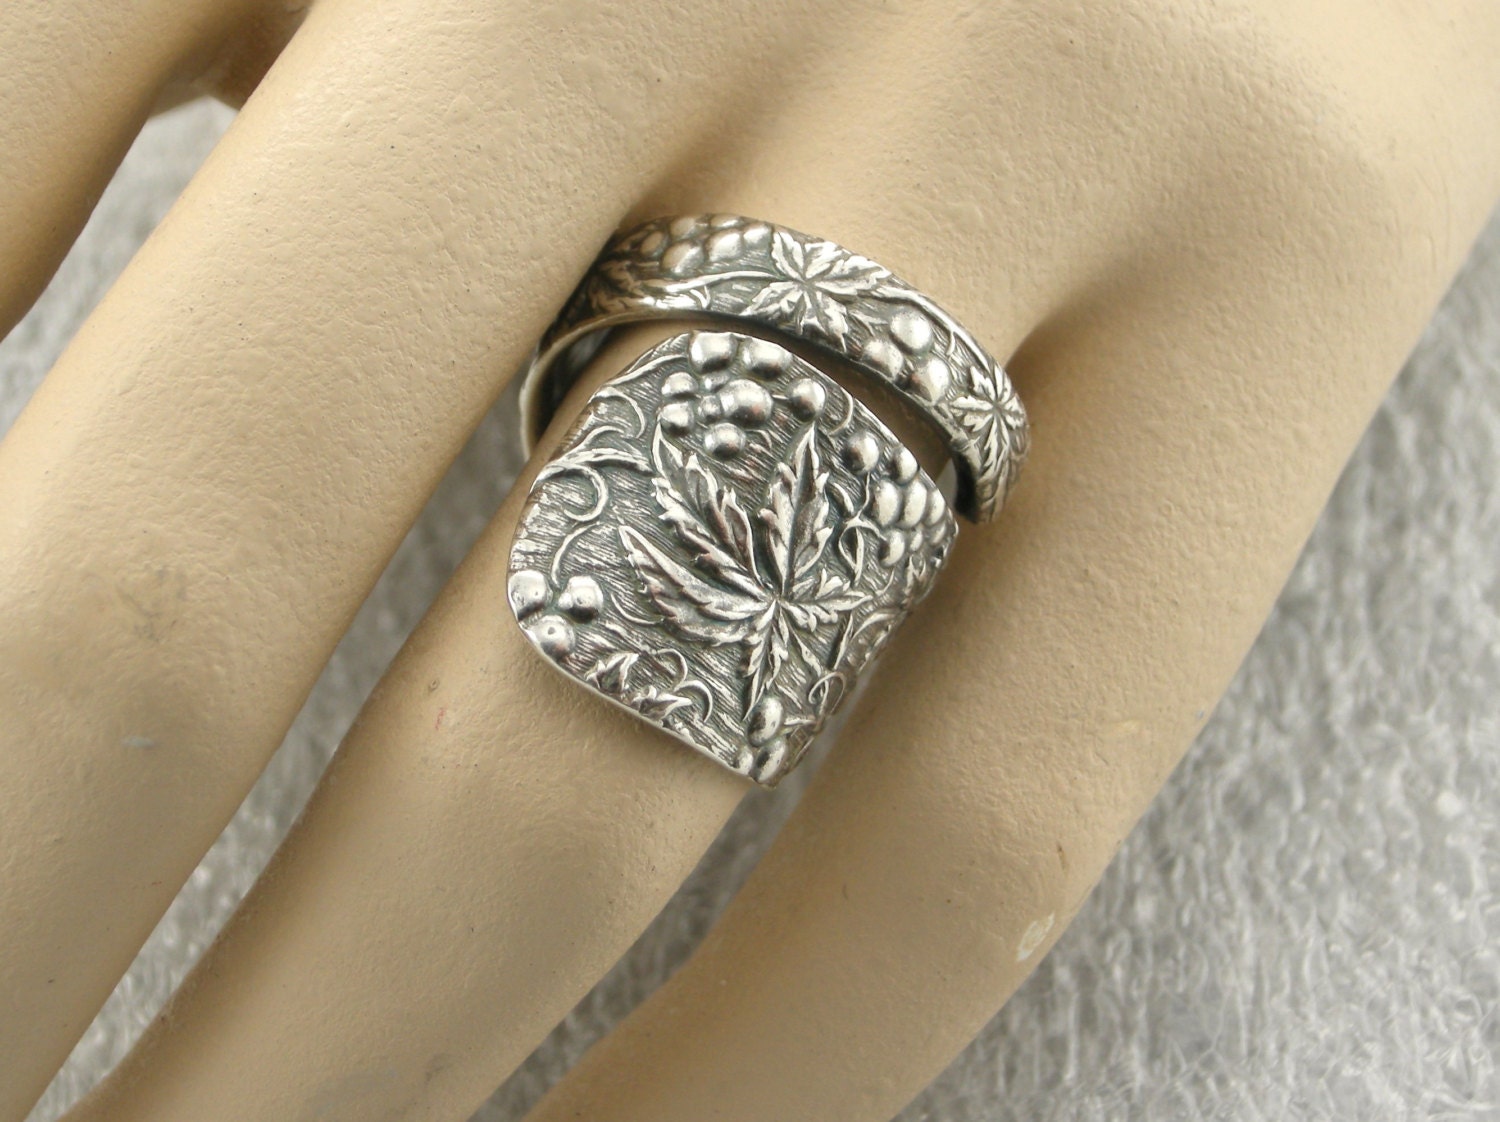 RING STERLING SILVER Hand Formed From by McWilliamsBopArt